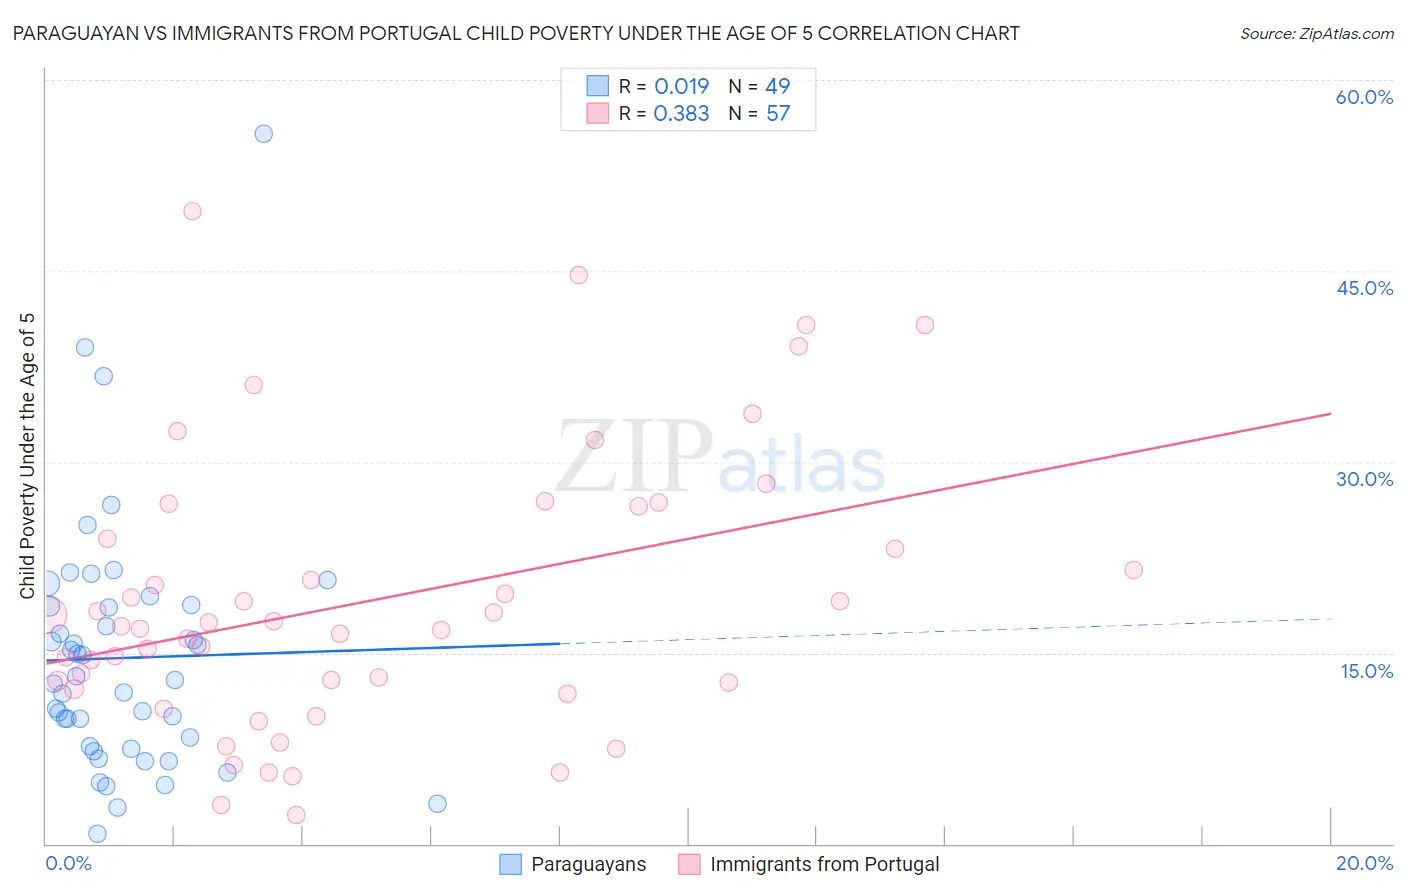 Paraguayan vs Immigrants from Portugal Child Poverty Under the Age of 5